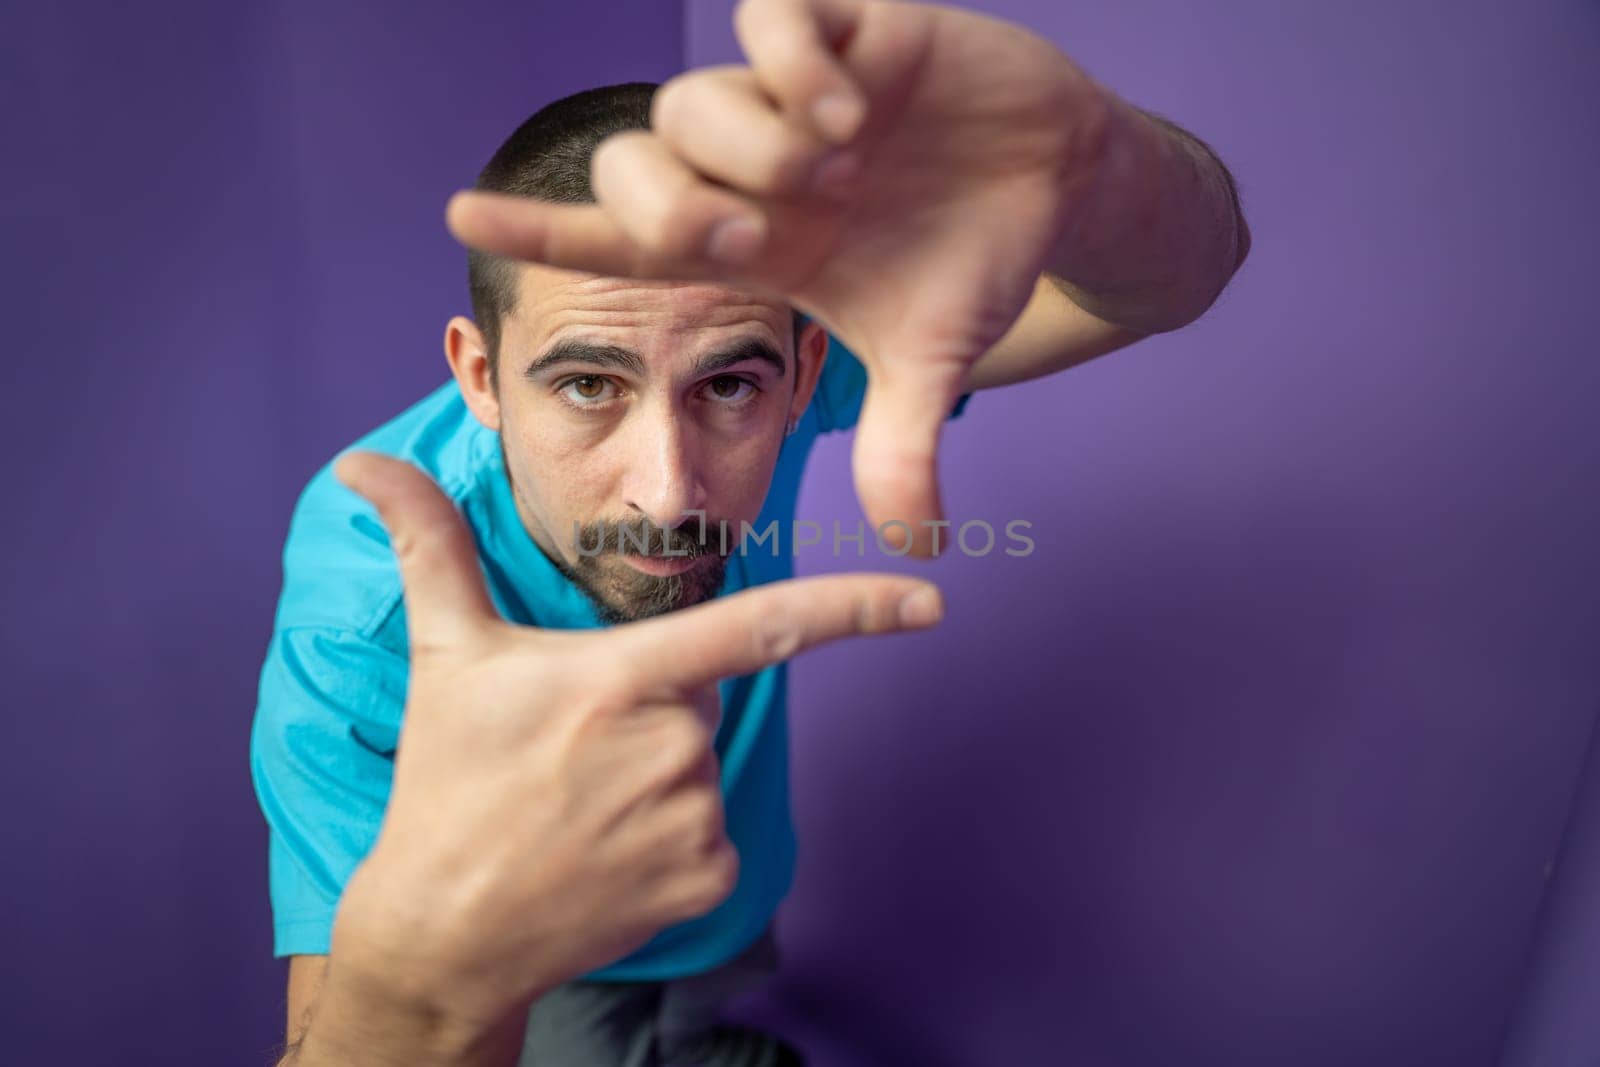 Man doing frame using hands and fingers, isolated over purple background by PaulCarr